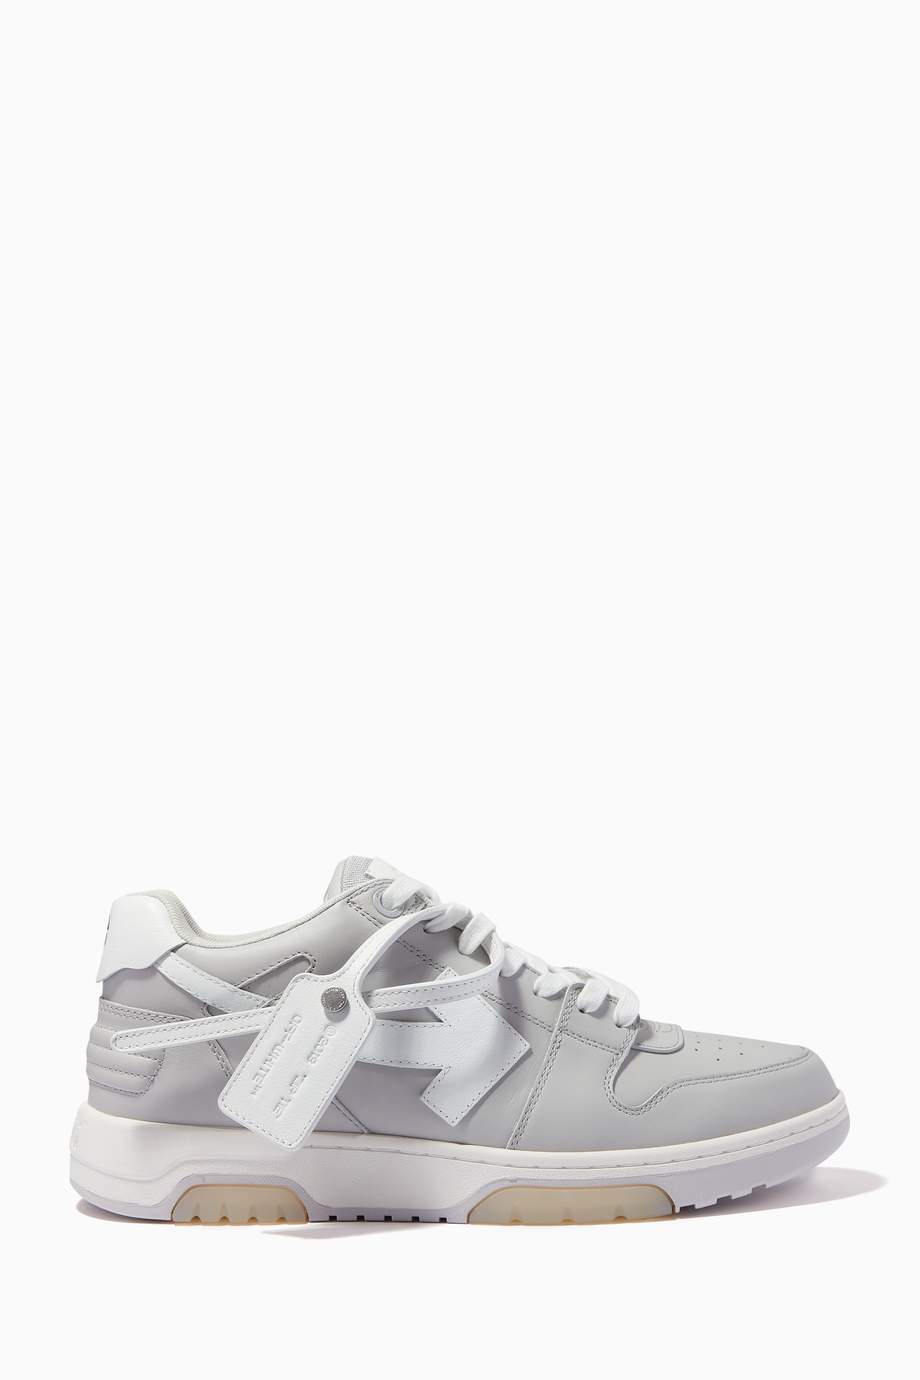 Shop Off-White Grey Out of Office 